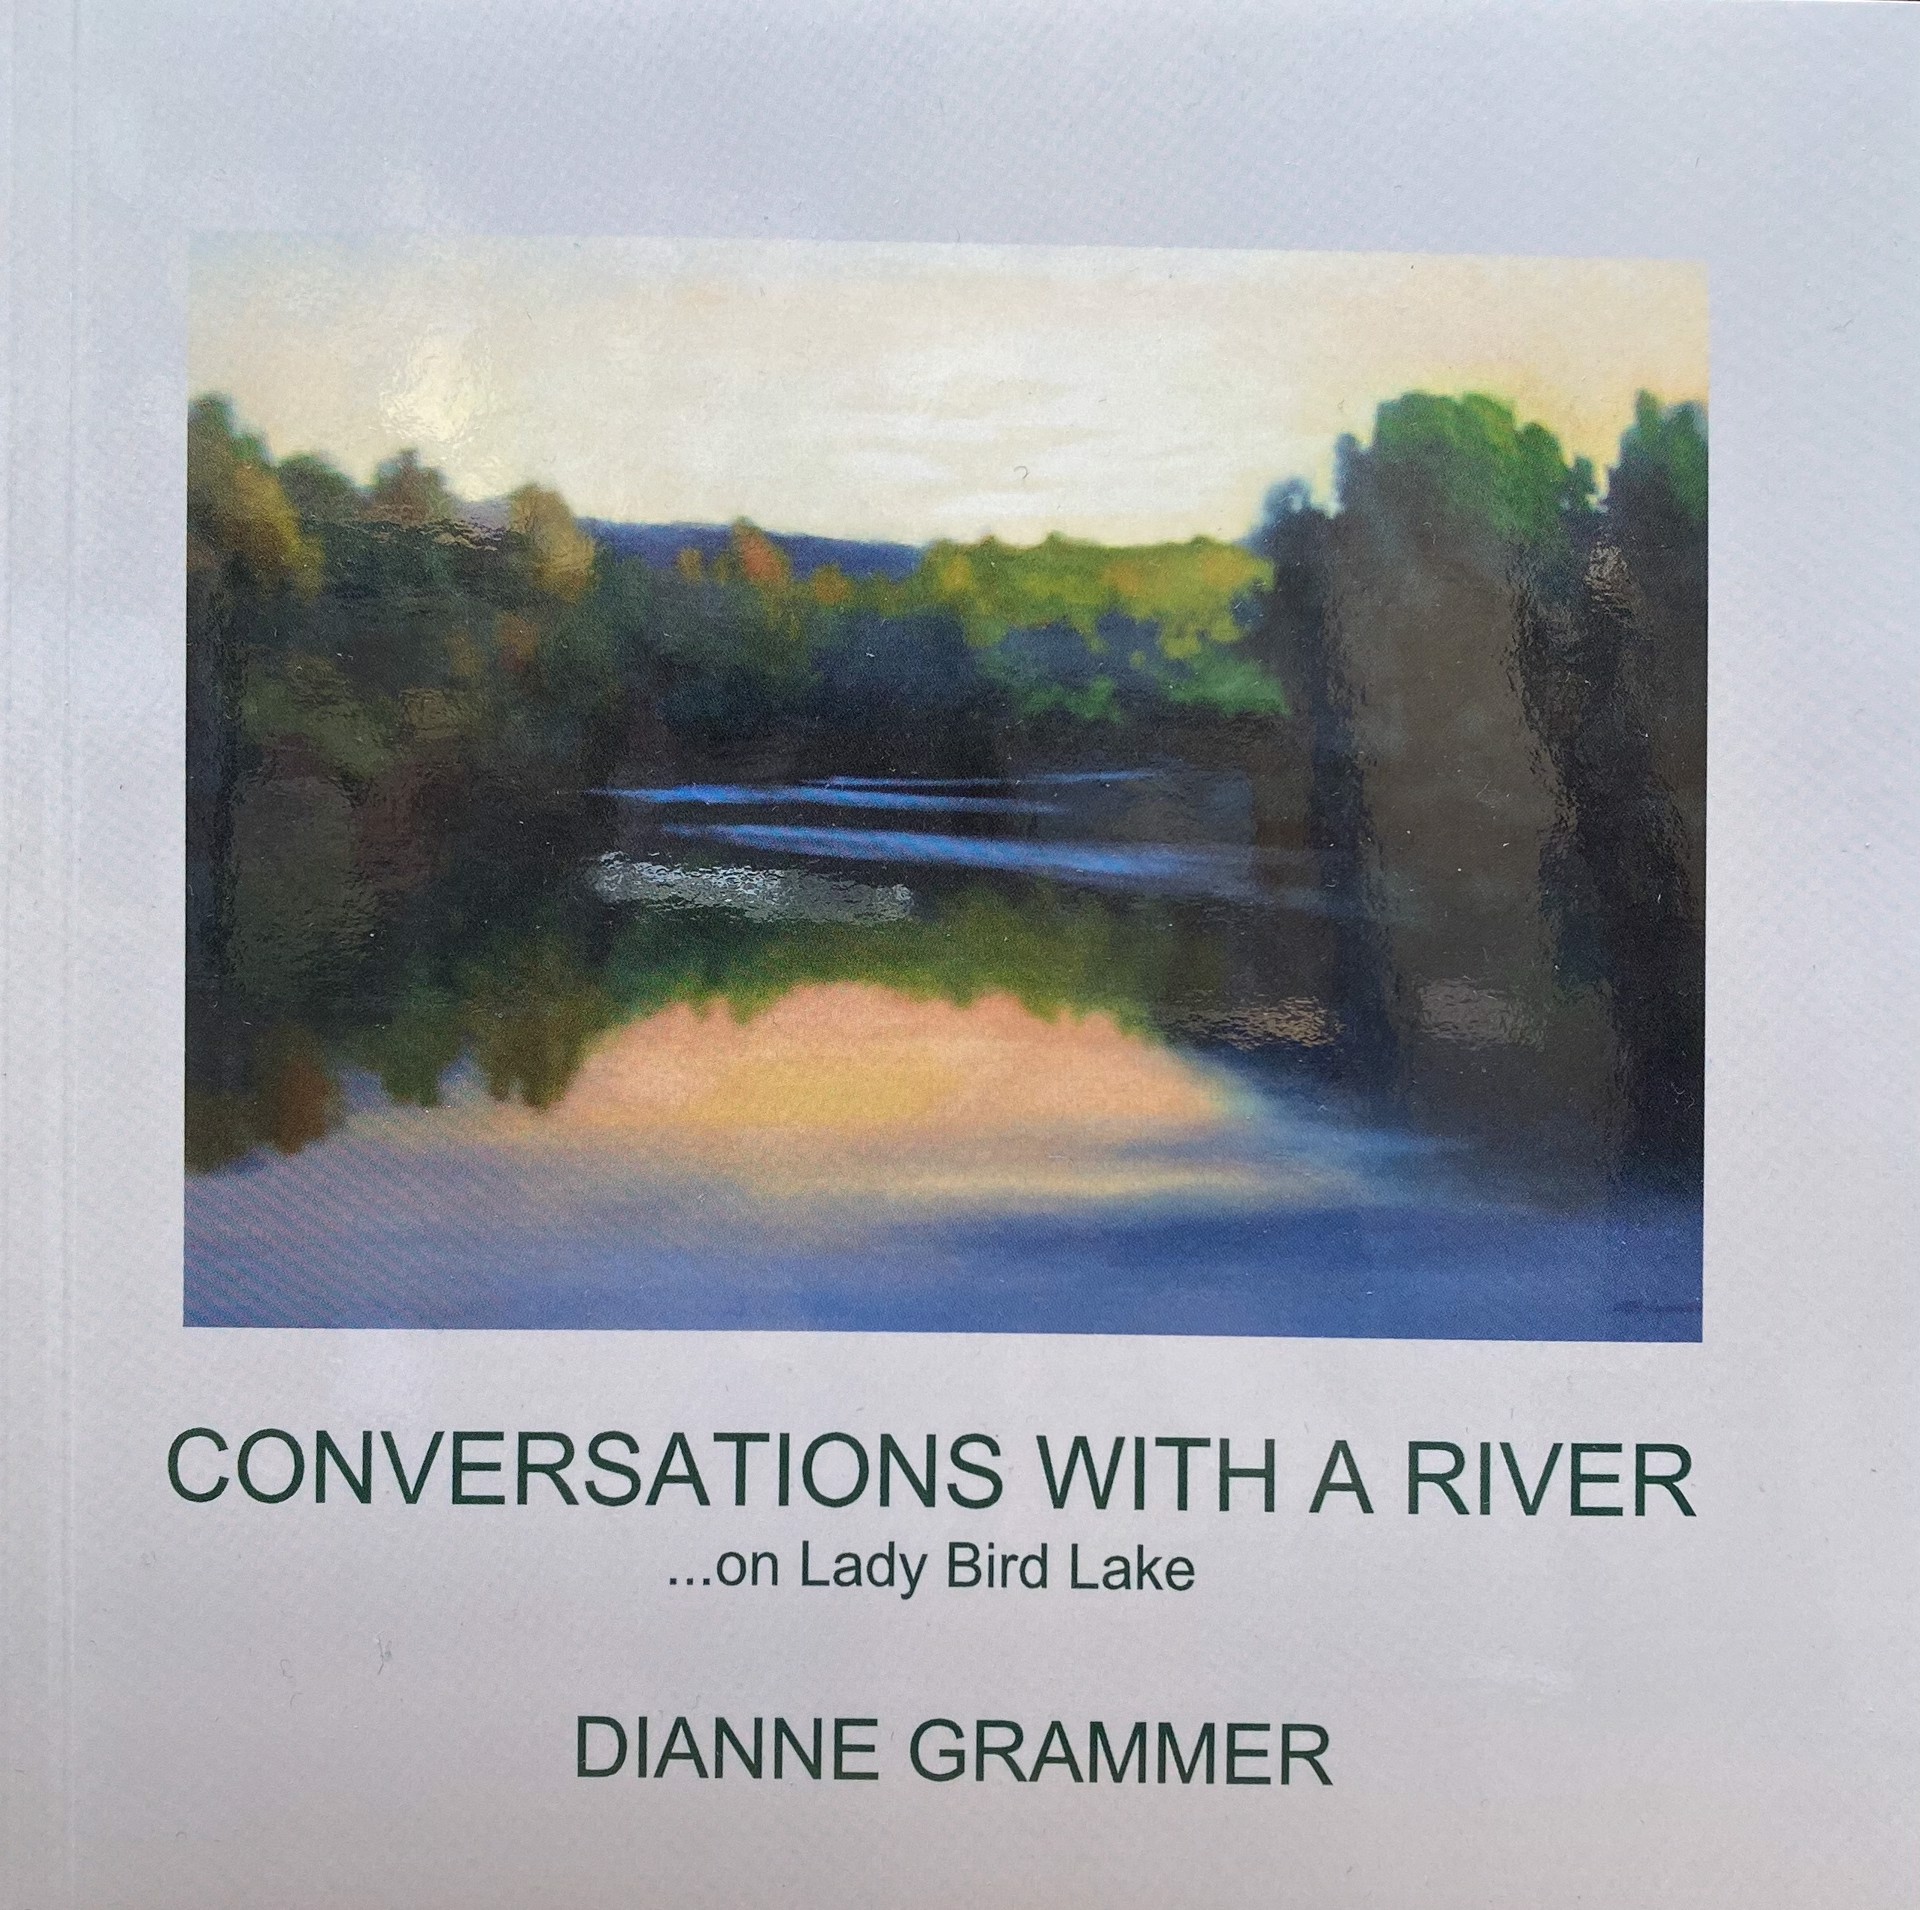 Dianne Grammer: Conversations with a River... (SC; 31/33) by Dianne Grammer